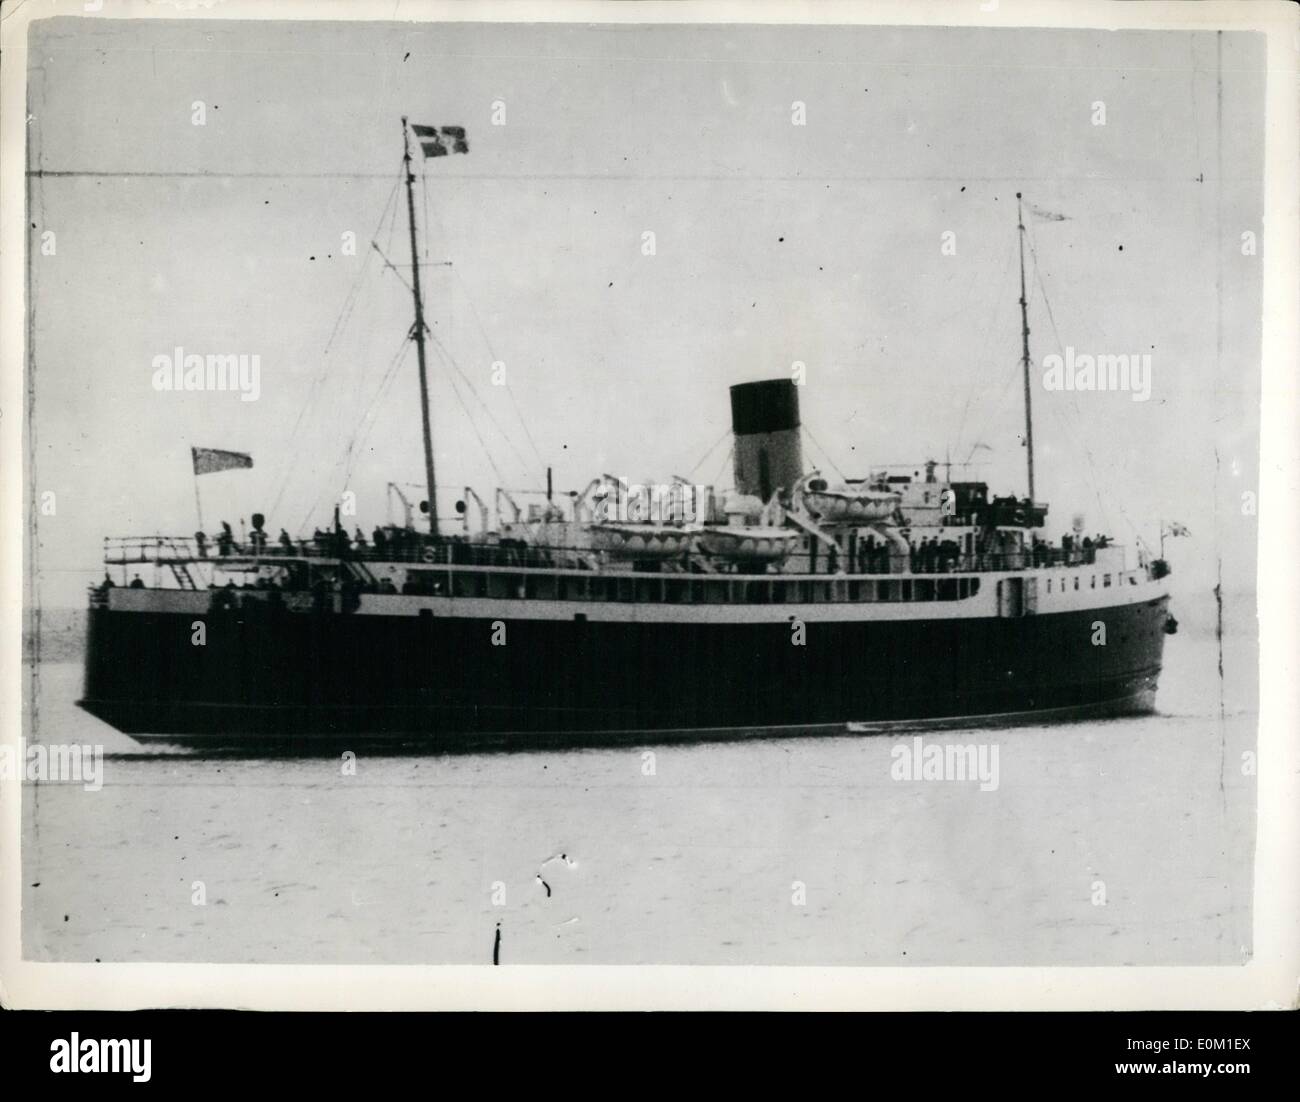 Jan. 31, 1953 - 31-1-53 180 in sinking ship told Take to the boats . Radio flashes from the British Railways steamer, Princess Victoria, carrying 180 passengers and crew, this afternoon said Ship on her beam ends preparing to abandon ship . Later messages from the Admiralty say that the ship has sunk, and that tugs are picking up survivors. Many other ships turned from their course and raced to the spot after being told the Princess Victoria was in pretty bad shape near the mouth of Loch Royan, Wigtownshire, off Scotland. Keystone Photo Shows: The British Railways steamer, Princess VictoriaÃ Stock Photo